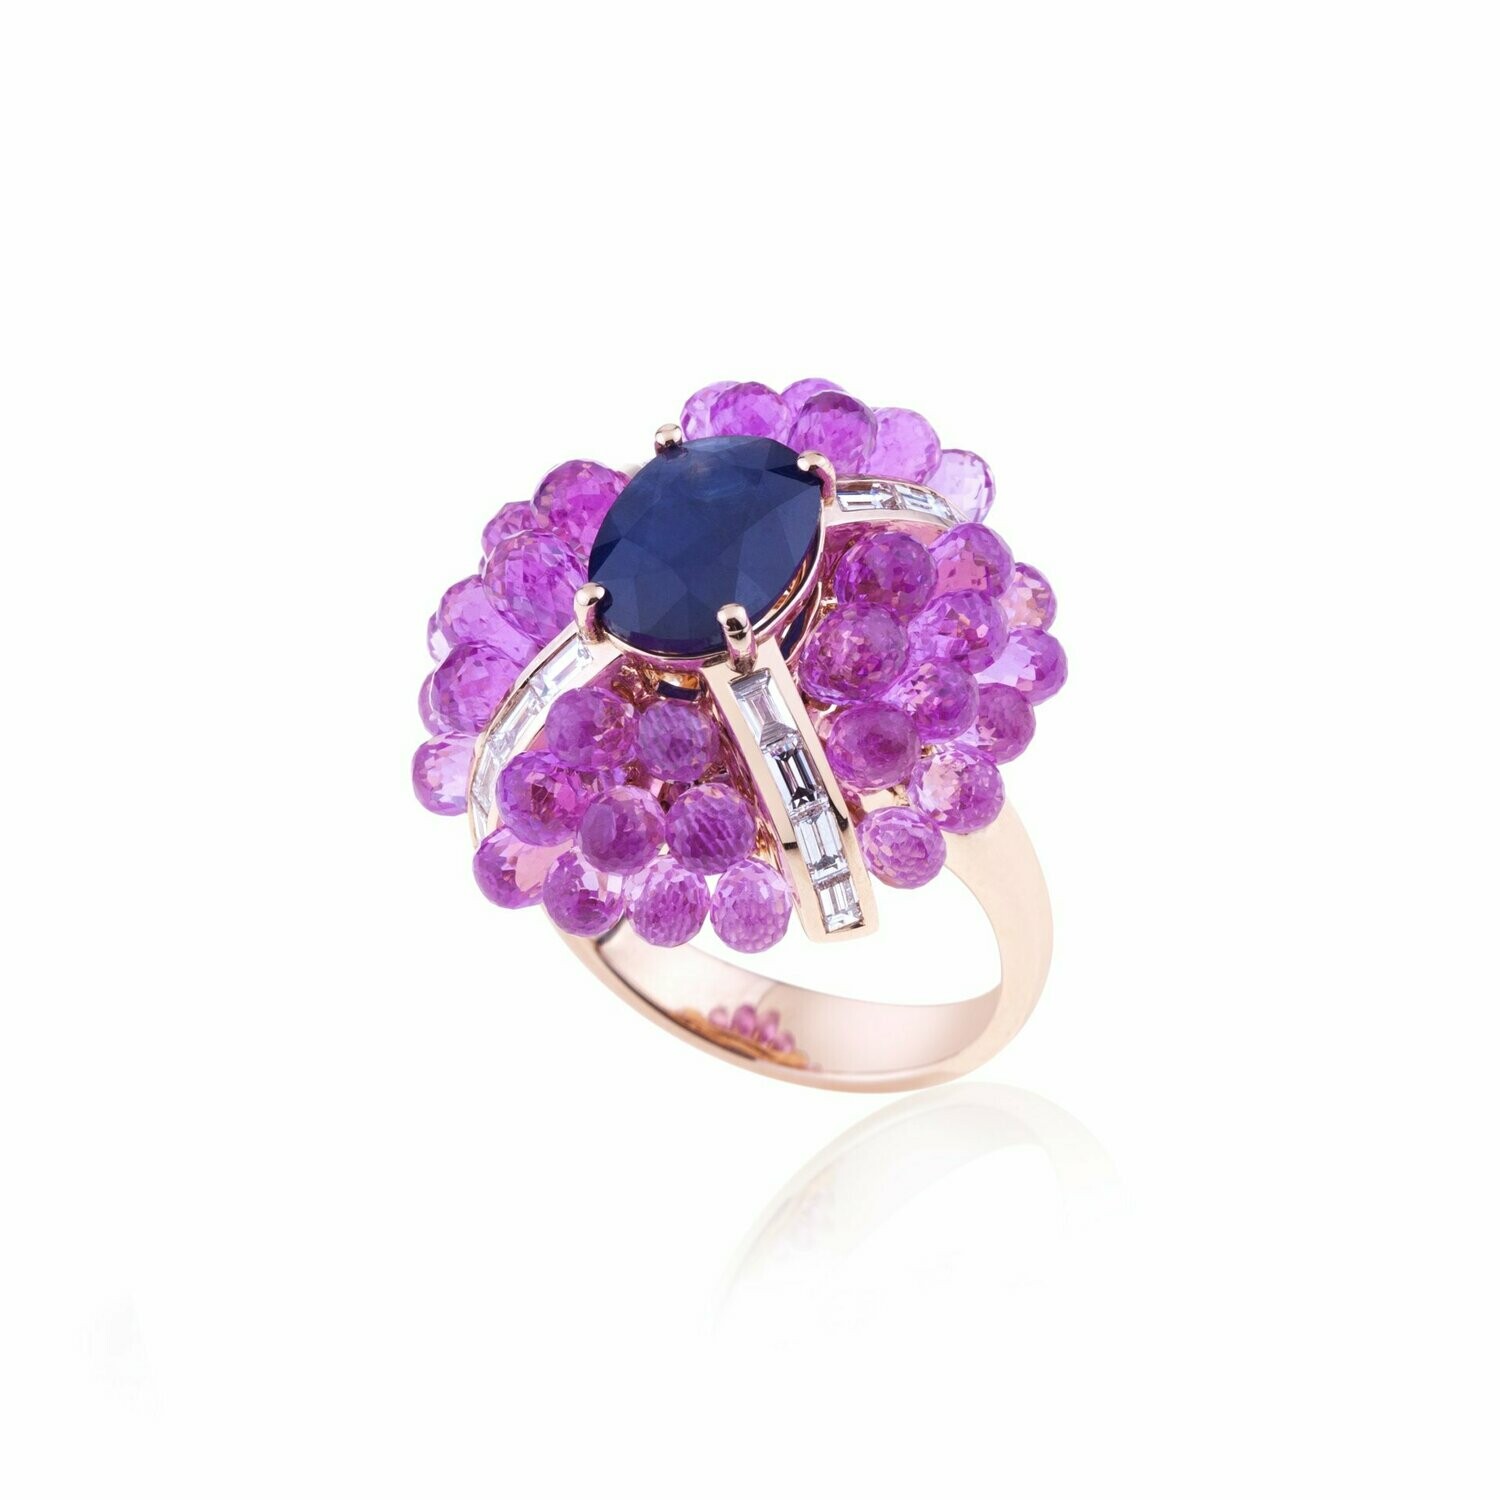 Rose gold with diamonds, pink sapphires and oval blue sapphire